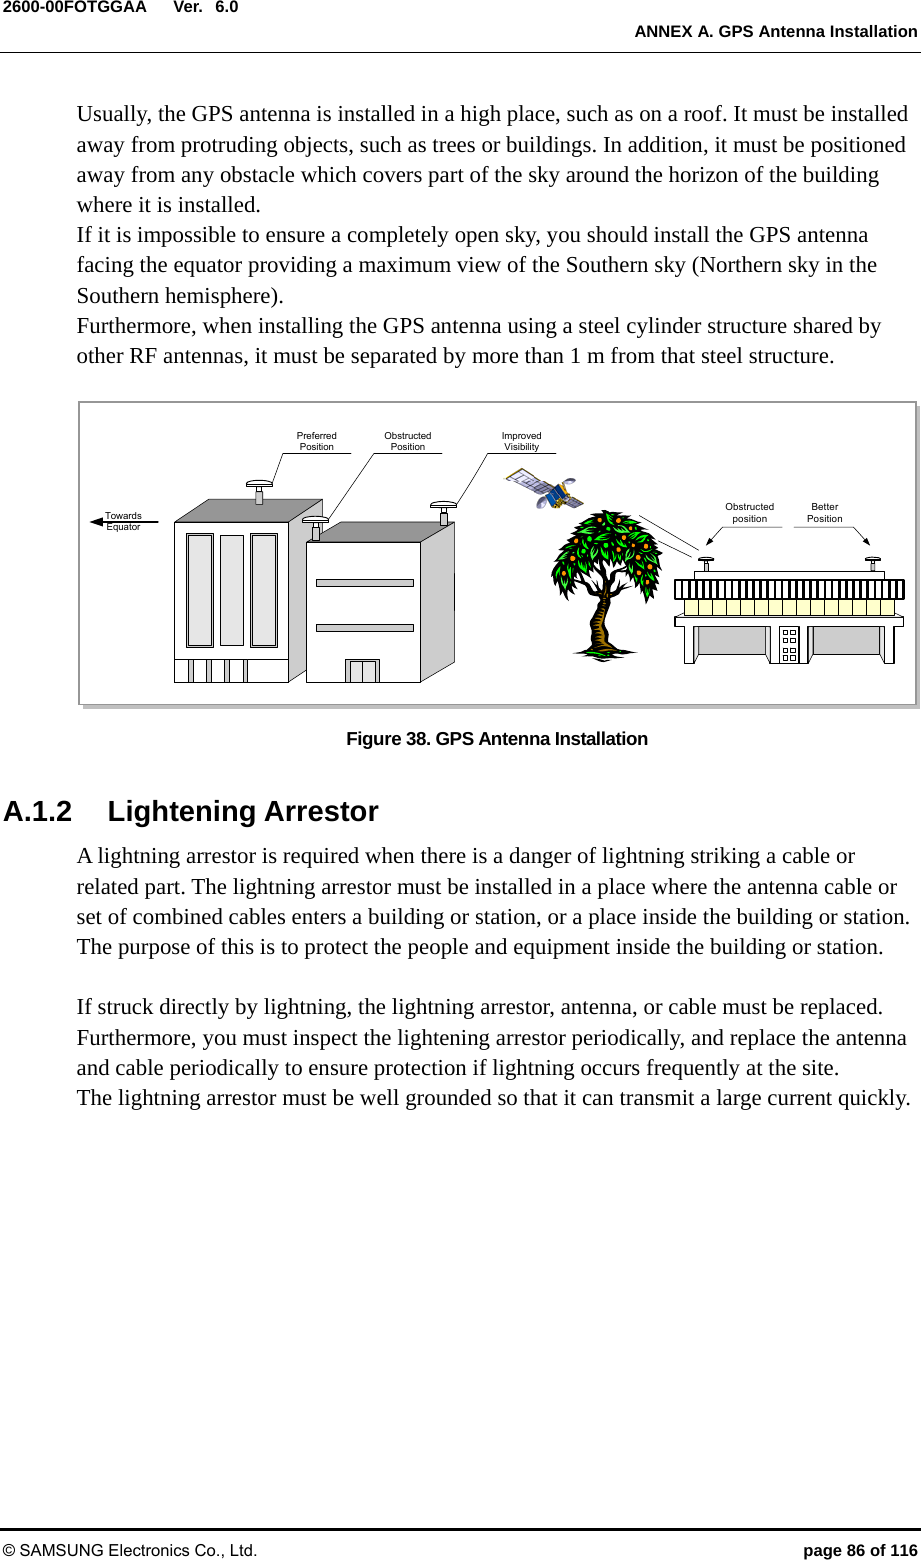  Ver.   ANNEX A. GPS Antenna Installation © SAMSUNG Electronics Co., Ltd.  page 86 of 116 2600-00FOTGGAA 6.0Usually, the GPS antenna is installed in a high place, such as on a roof. It must be installed away from protruding objects, such as trees or buildings. In addition, it must be positioned away from any obstacle which covers part of the sky around the horizon of the building where it is installed.   If it is impossible to ensure a completely open sky, you should install the GPS antenna facing the equator providing a maximum view of the Southern sky (Northern sky in the Southern hemisphere). Furthermore, when installing the GPS antenna using a steel cylinder structure shared by other RF antennas, it must be separated by more than 1 m from that steel structure.  Figure 38. GPS Antenna Installation  A.1.2 Lightening Arrestor A lightning arrestor is required when there is a danger of lightning striking a cable or related part. The lightning arrestor must be installed in a place where the antenna cable or set of combined cables enters a building or station, or a place inside the building or station. The purpose of this is to protect the people and equipment inside the building or station.    If struck directly by lightning, the lightning arrestor, antenna, or cable must be replaced. Furthermore, you must inspect the lightening arrestor periodically, and replace the antenna and cable periodically to ensure protection if lightning occurs frequently at the site.   The lightning arrestor must be well grounded so that it can transmit a large current quickly. TowardsEquatorPreferredPositionObstructedPositionImprovedVisibilityObstructedpositionBetterPosition